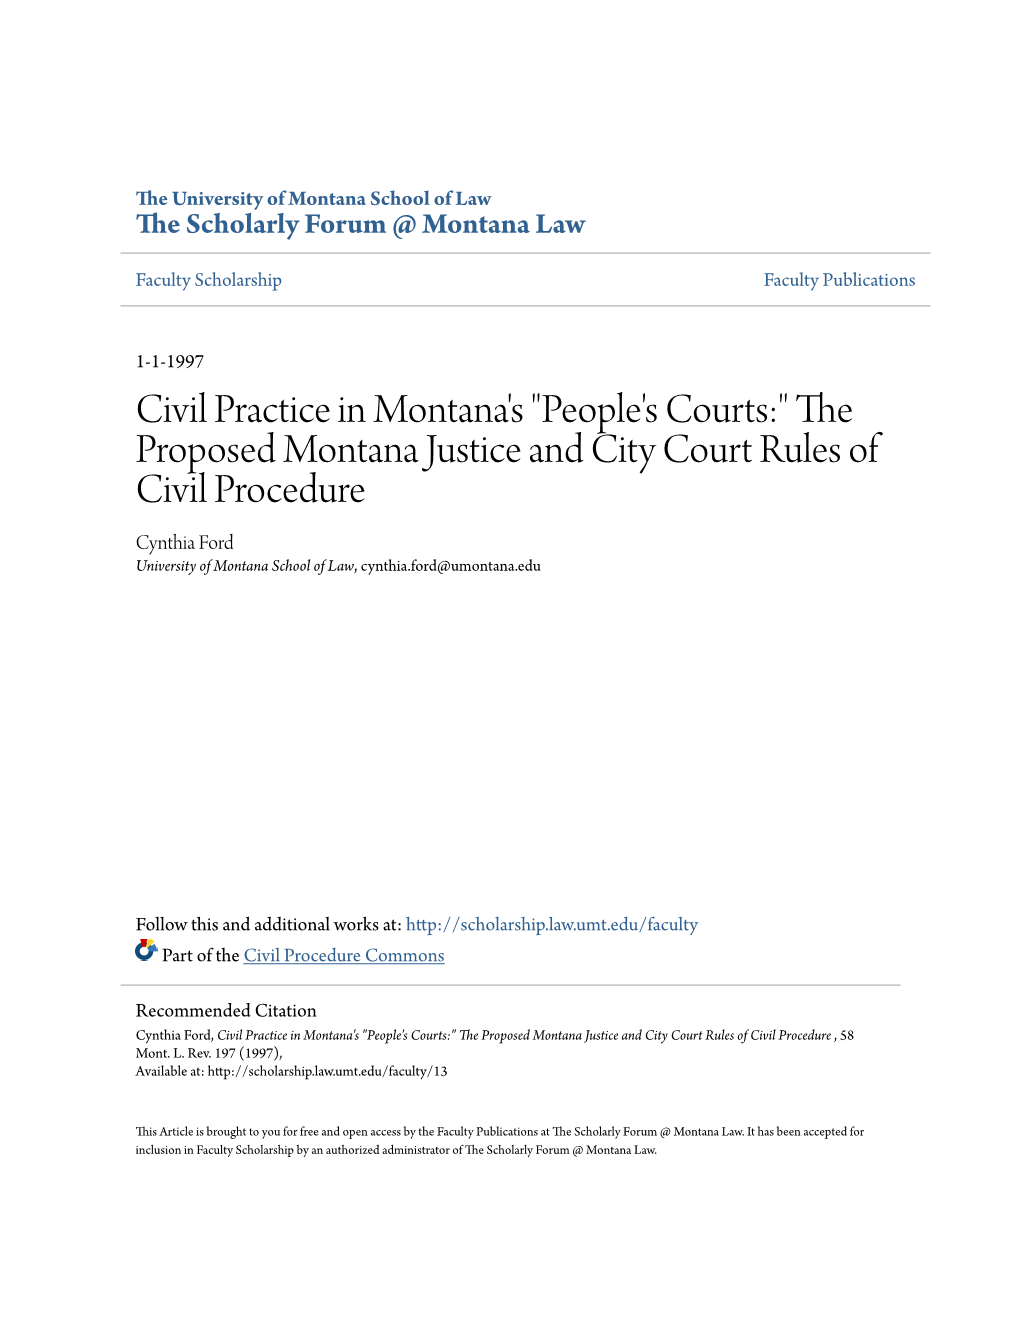 "People's Courts:" the Proposed Montana Justice and City Court Rules of Civil Procedure Cynthia Ford University of Montana School of Law, Cynthia.Ford@Umontana.Edu